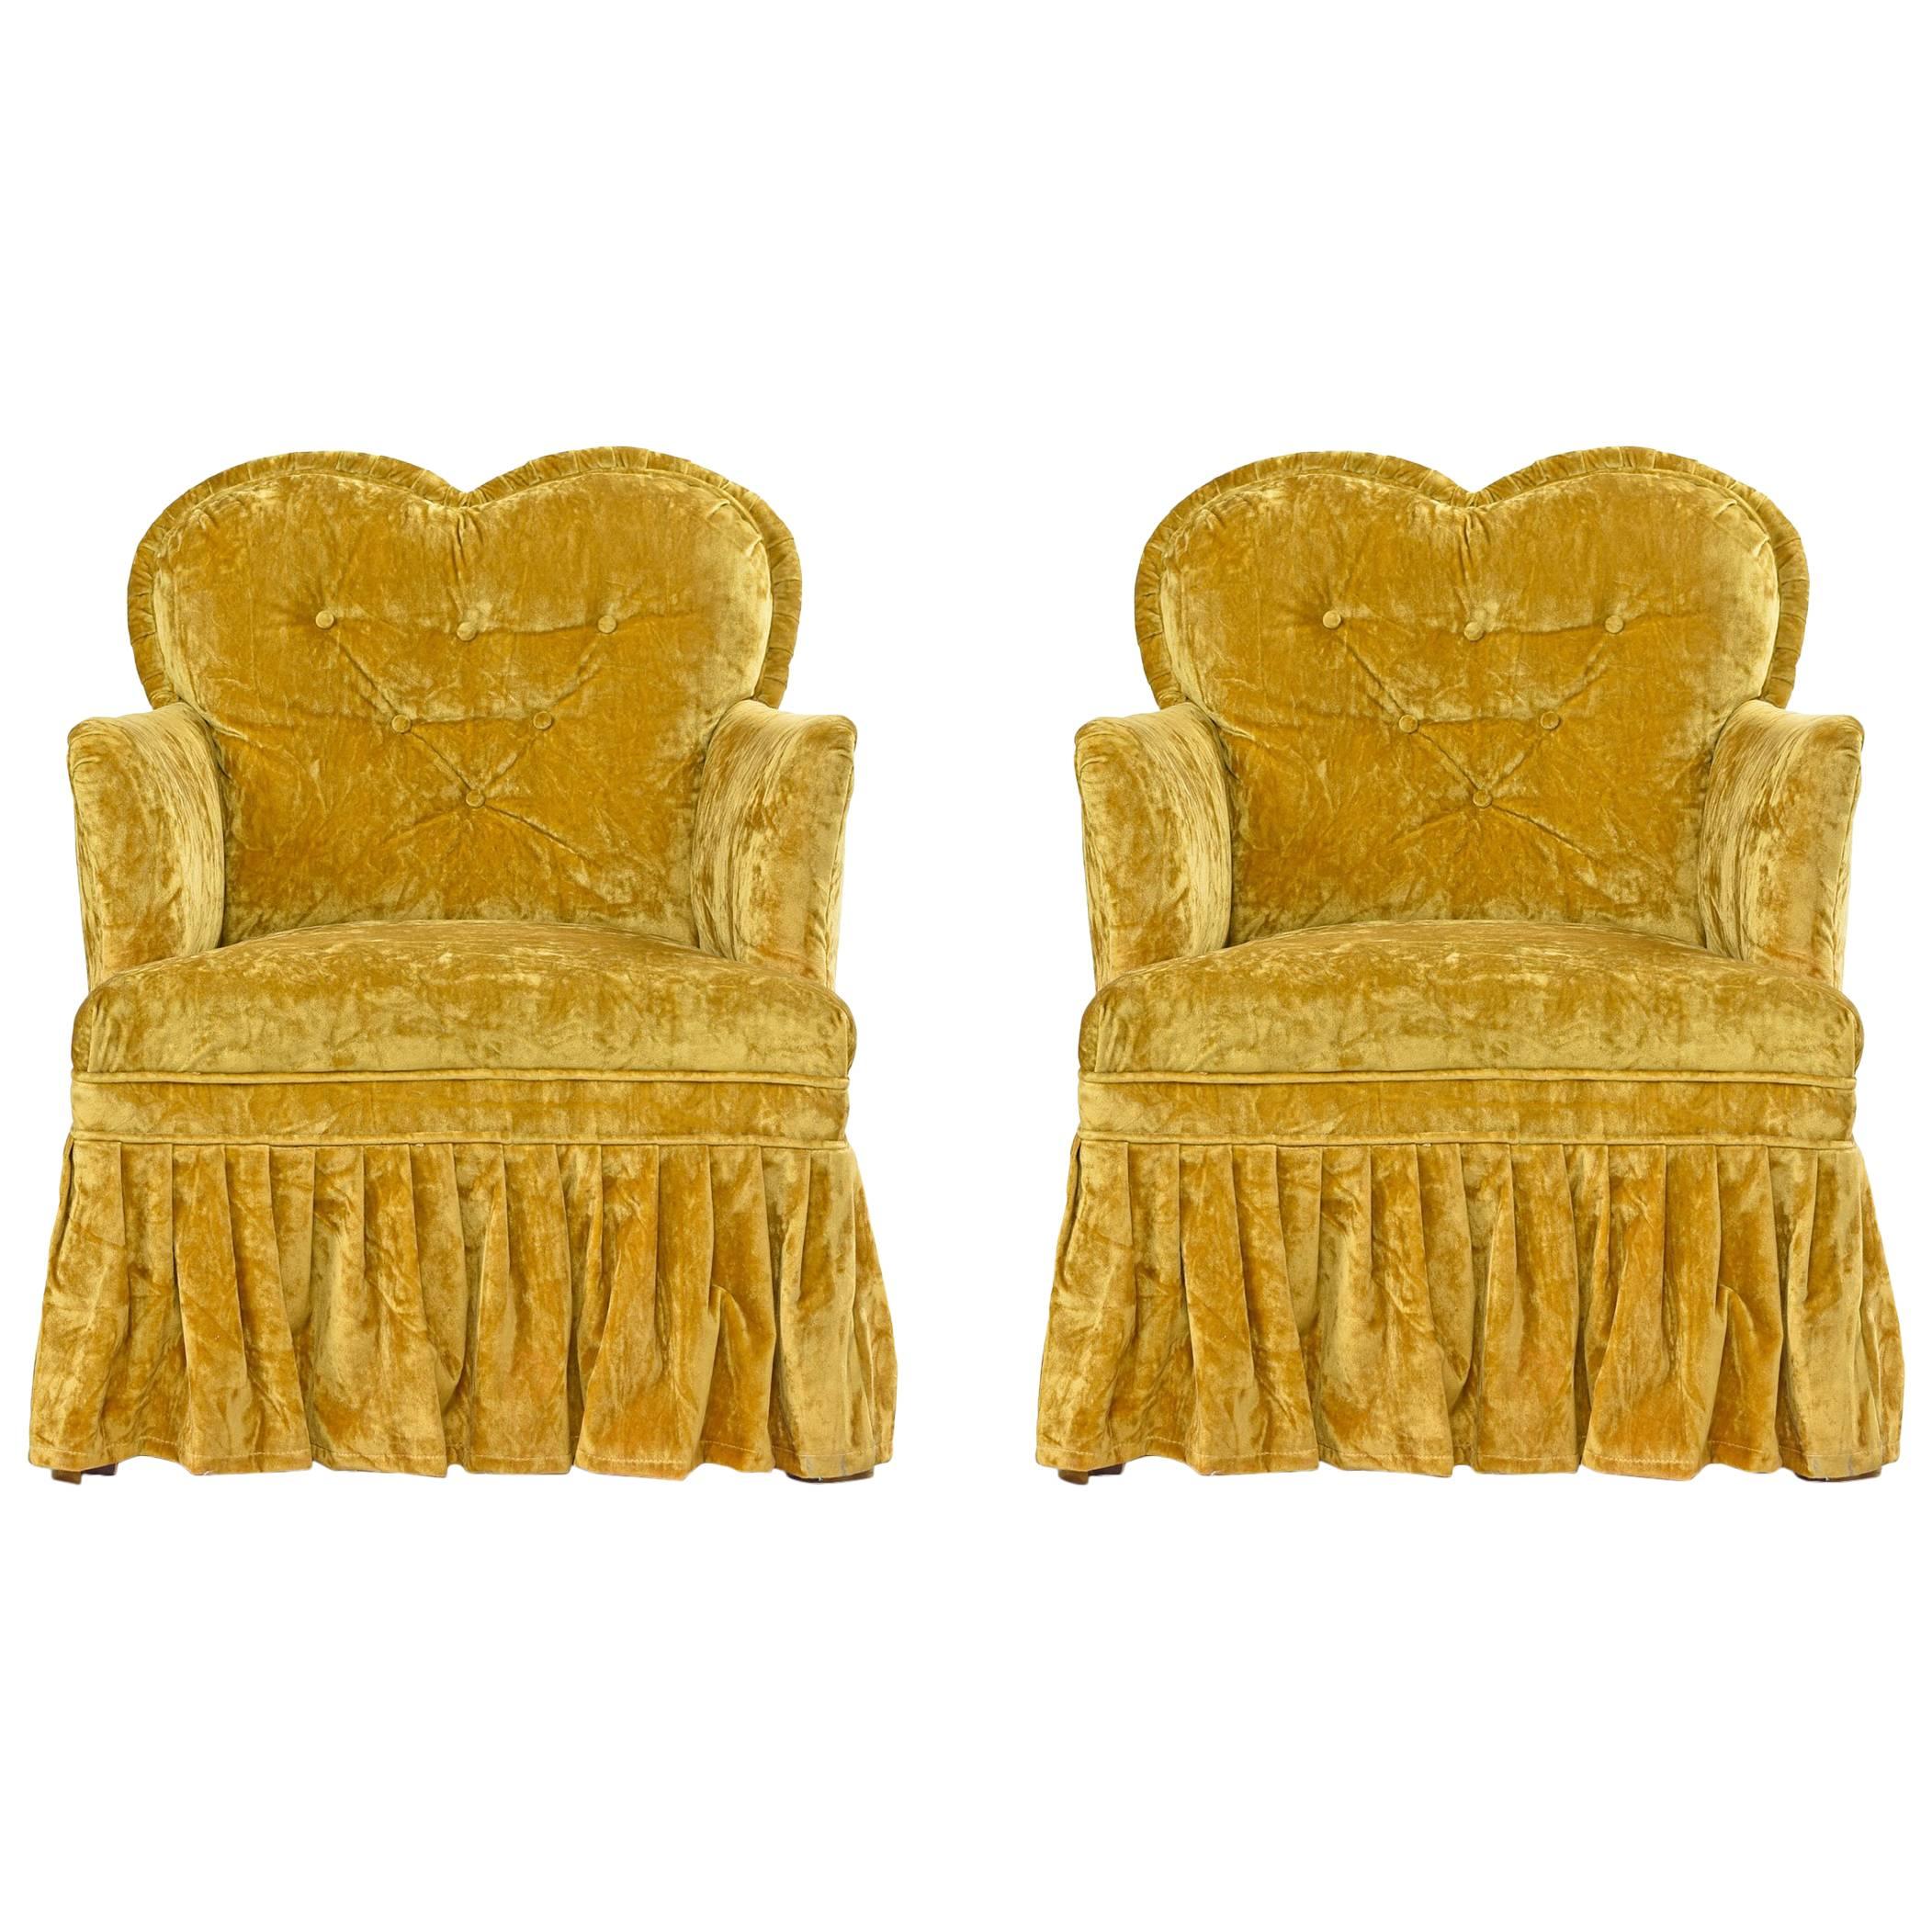 Add a touch of retro chic to your bedroom, living room or boudoir with these reupholstered bedroom chairs. This set of sumptuous armchairs accommodates smaller spaces, and makes for great accent pieces. Included are the original custom made plastic